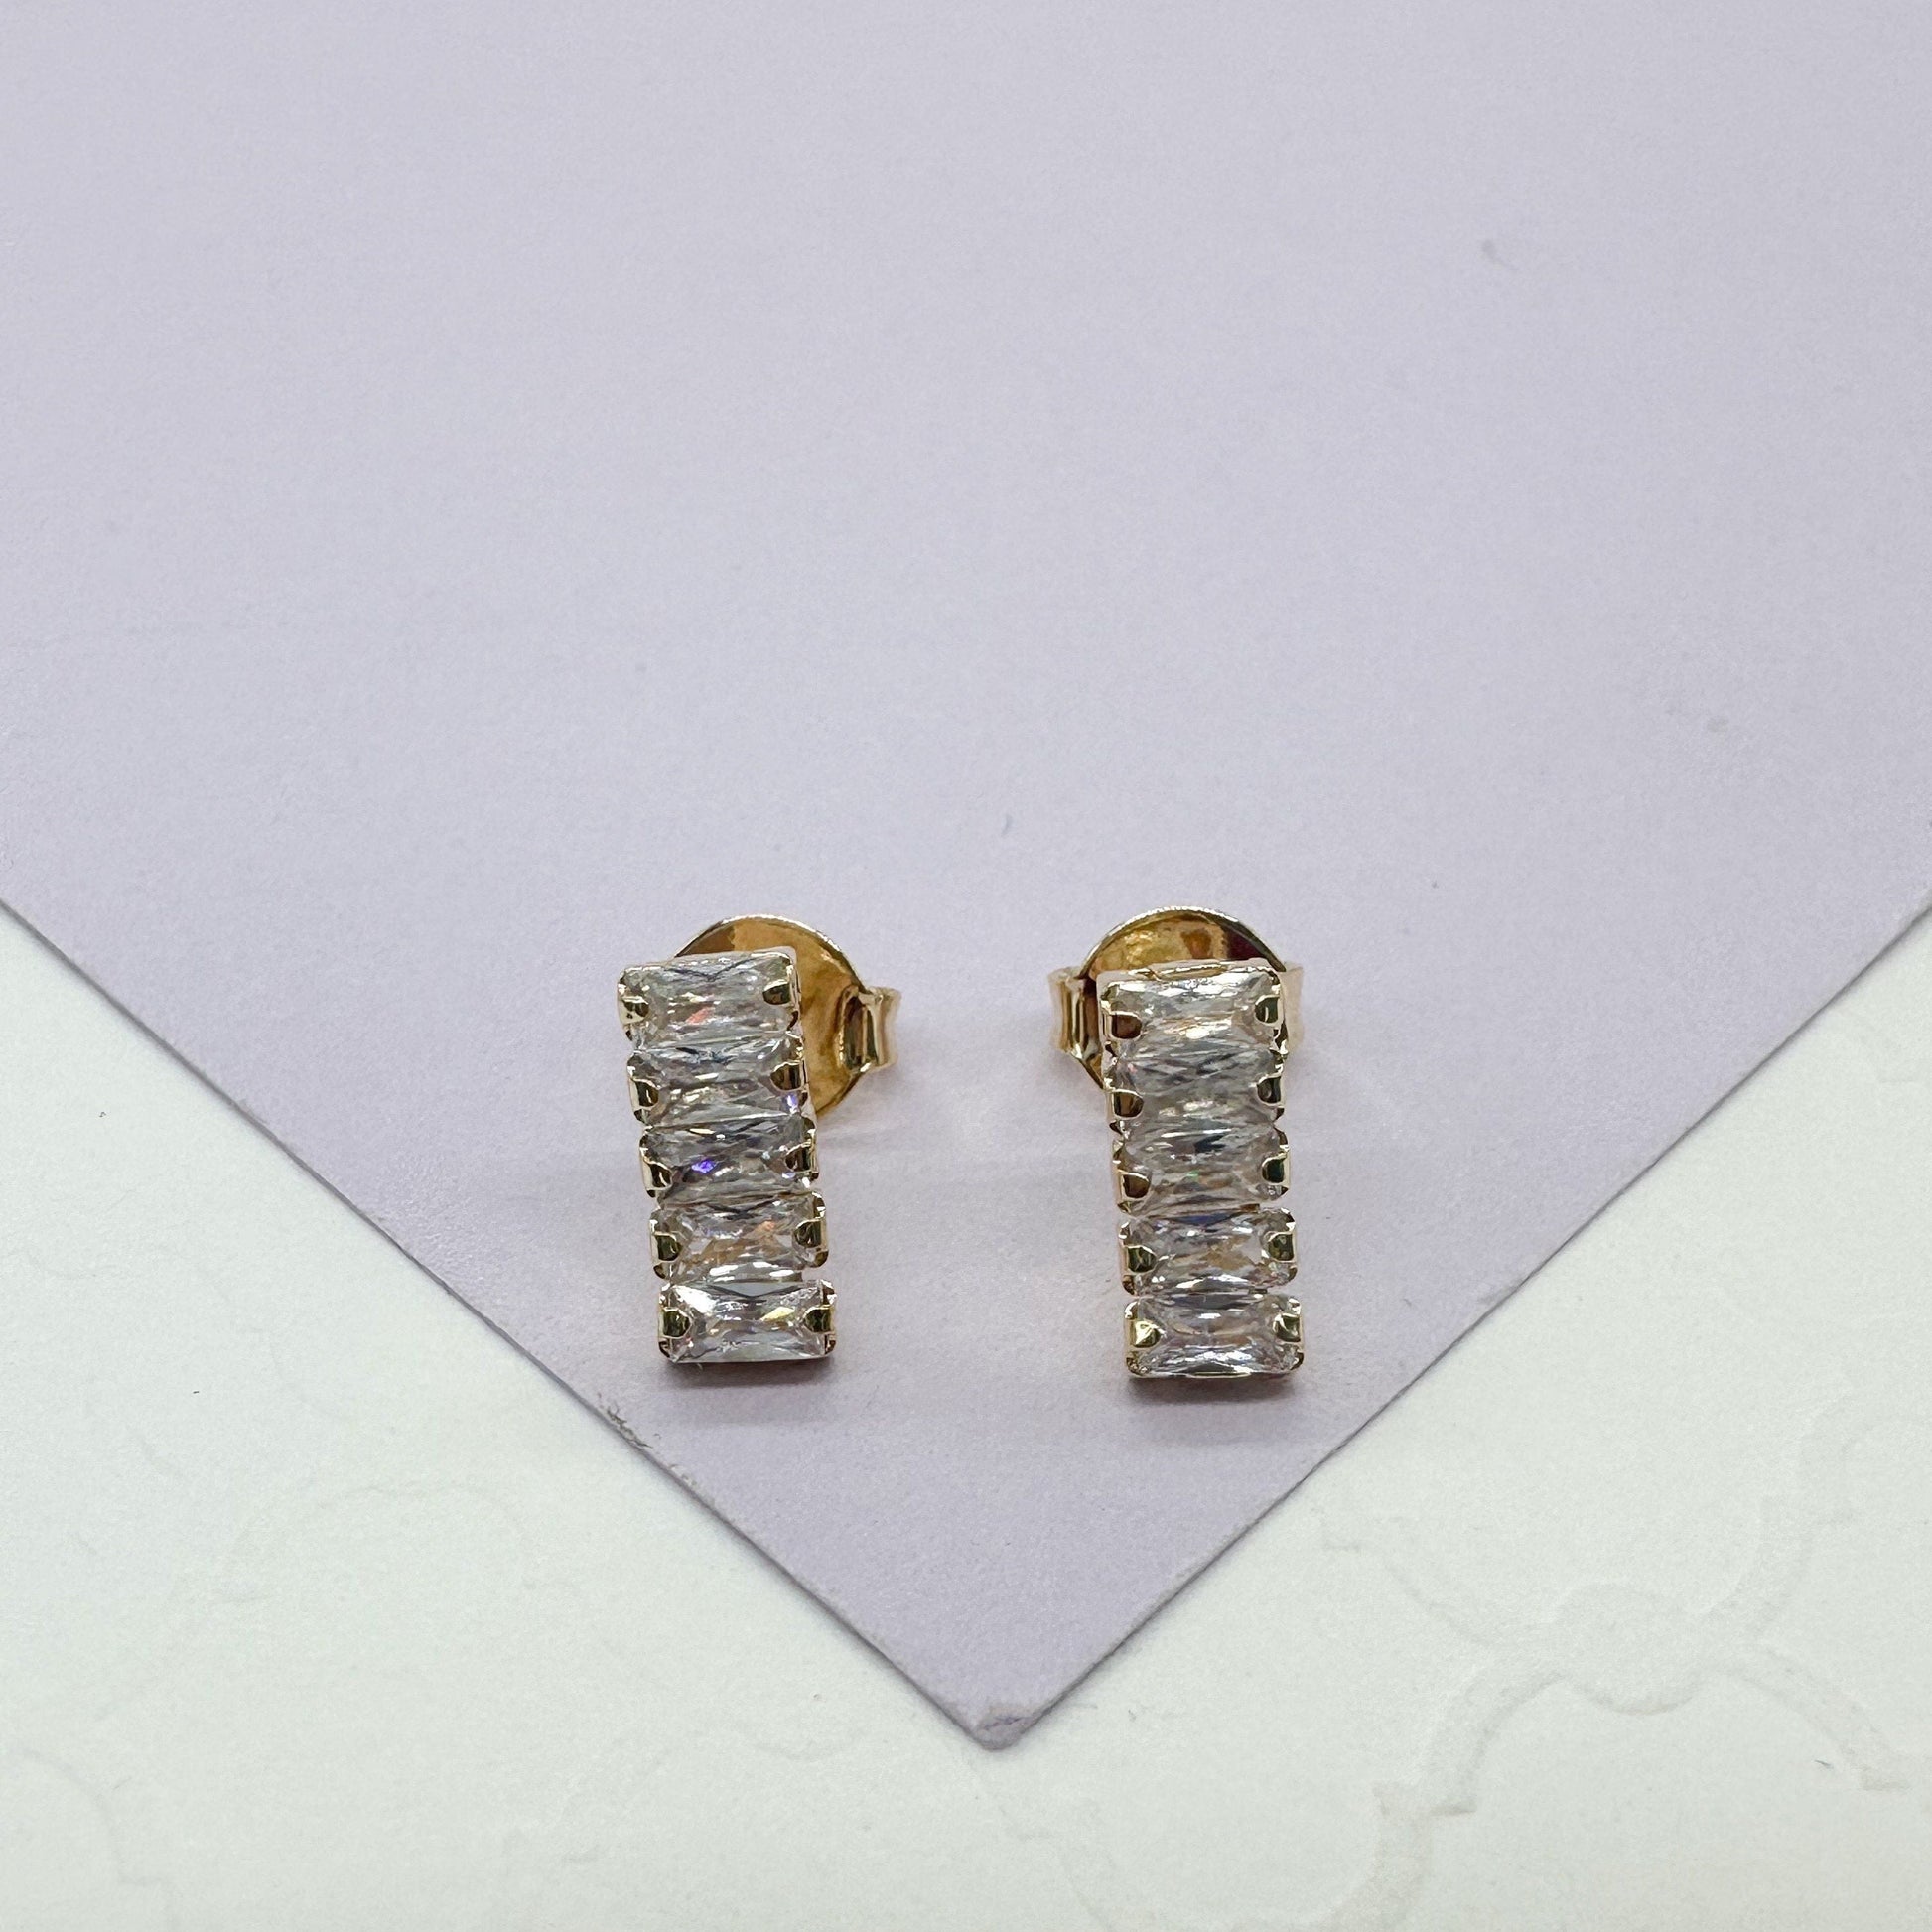 18k Gold Filled Baguette Earrings In 2 Different Styles